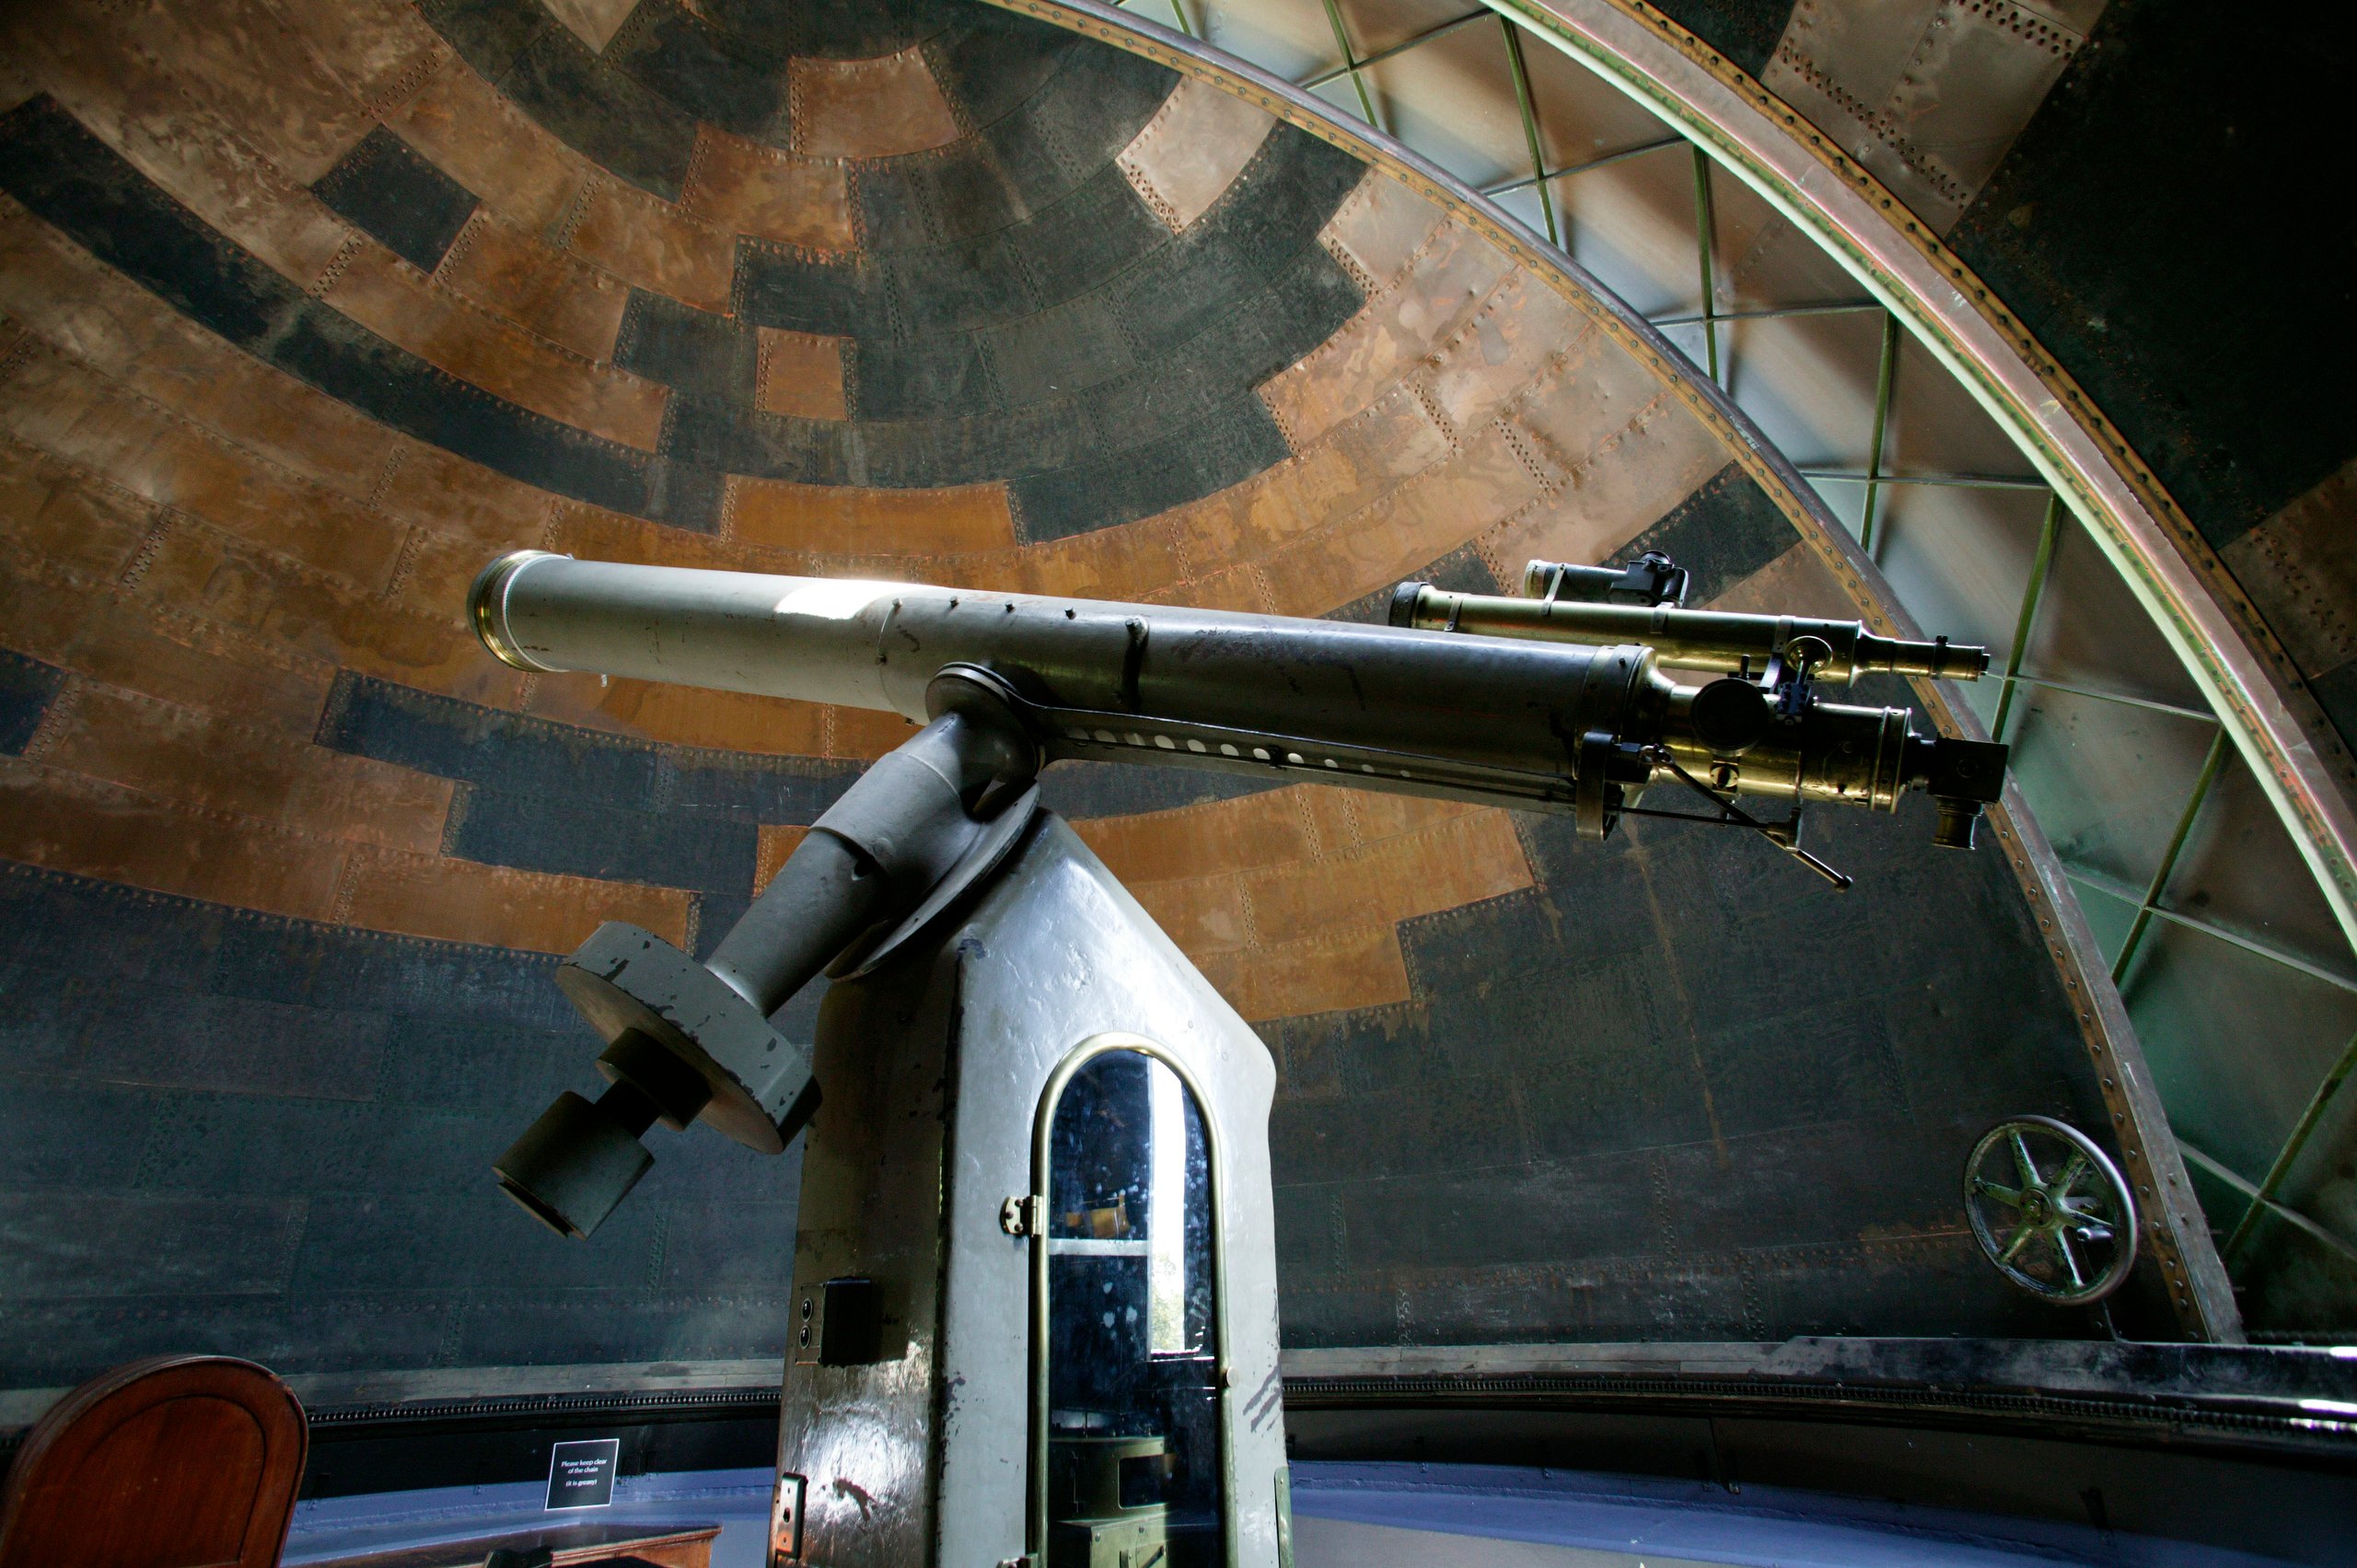 Equatorial refracting telescope with accessories by Hugo Schroeder